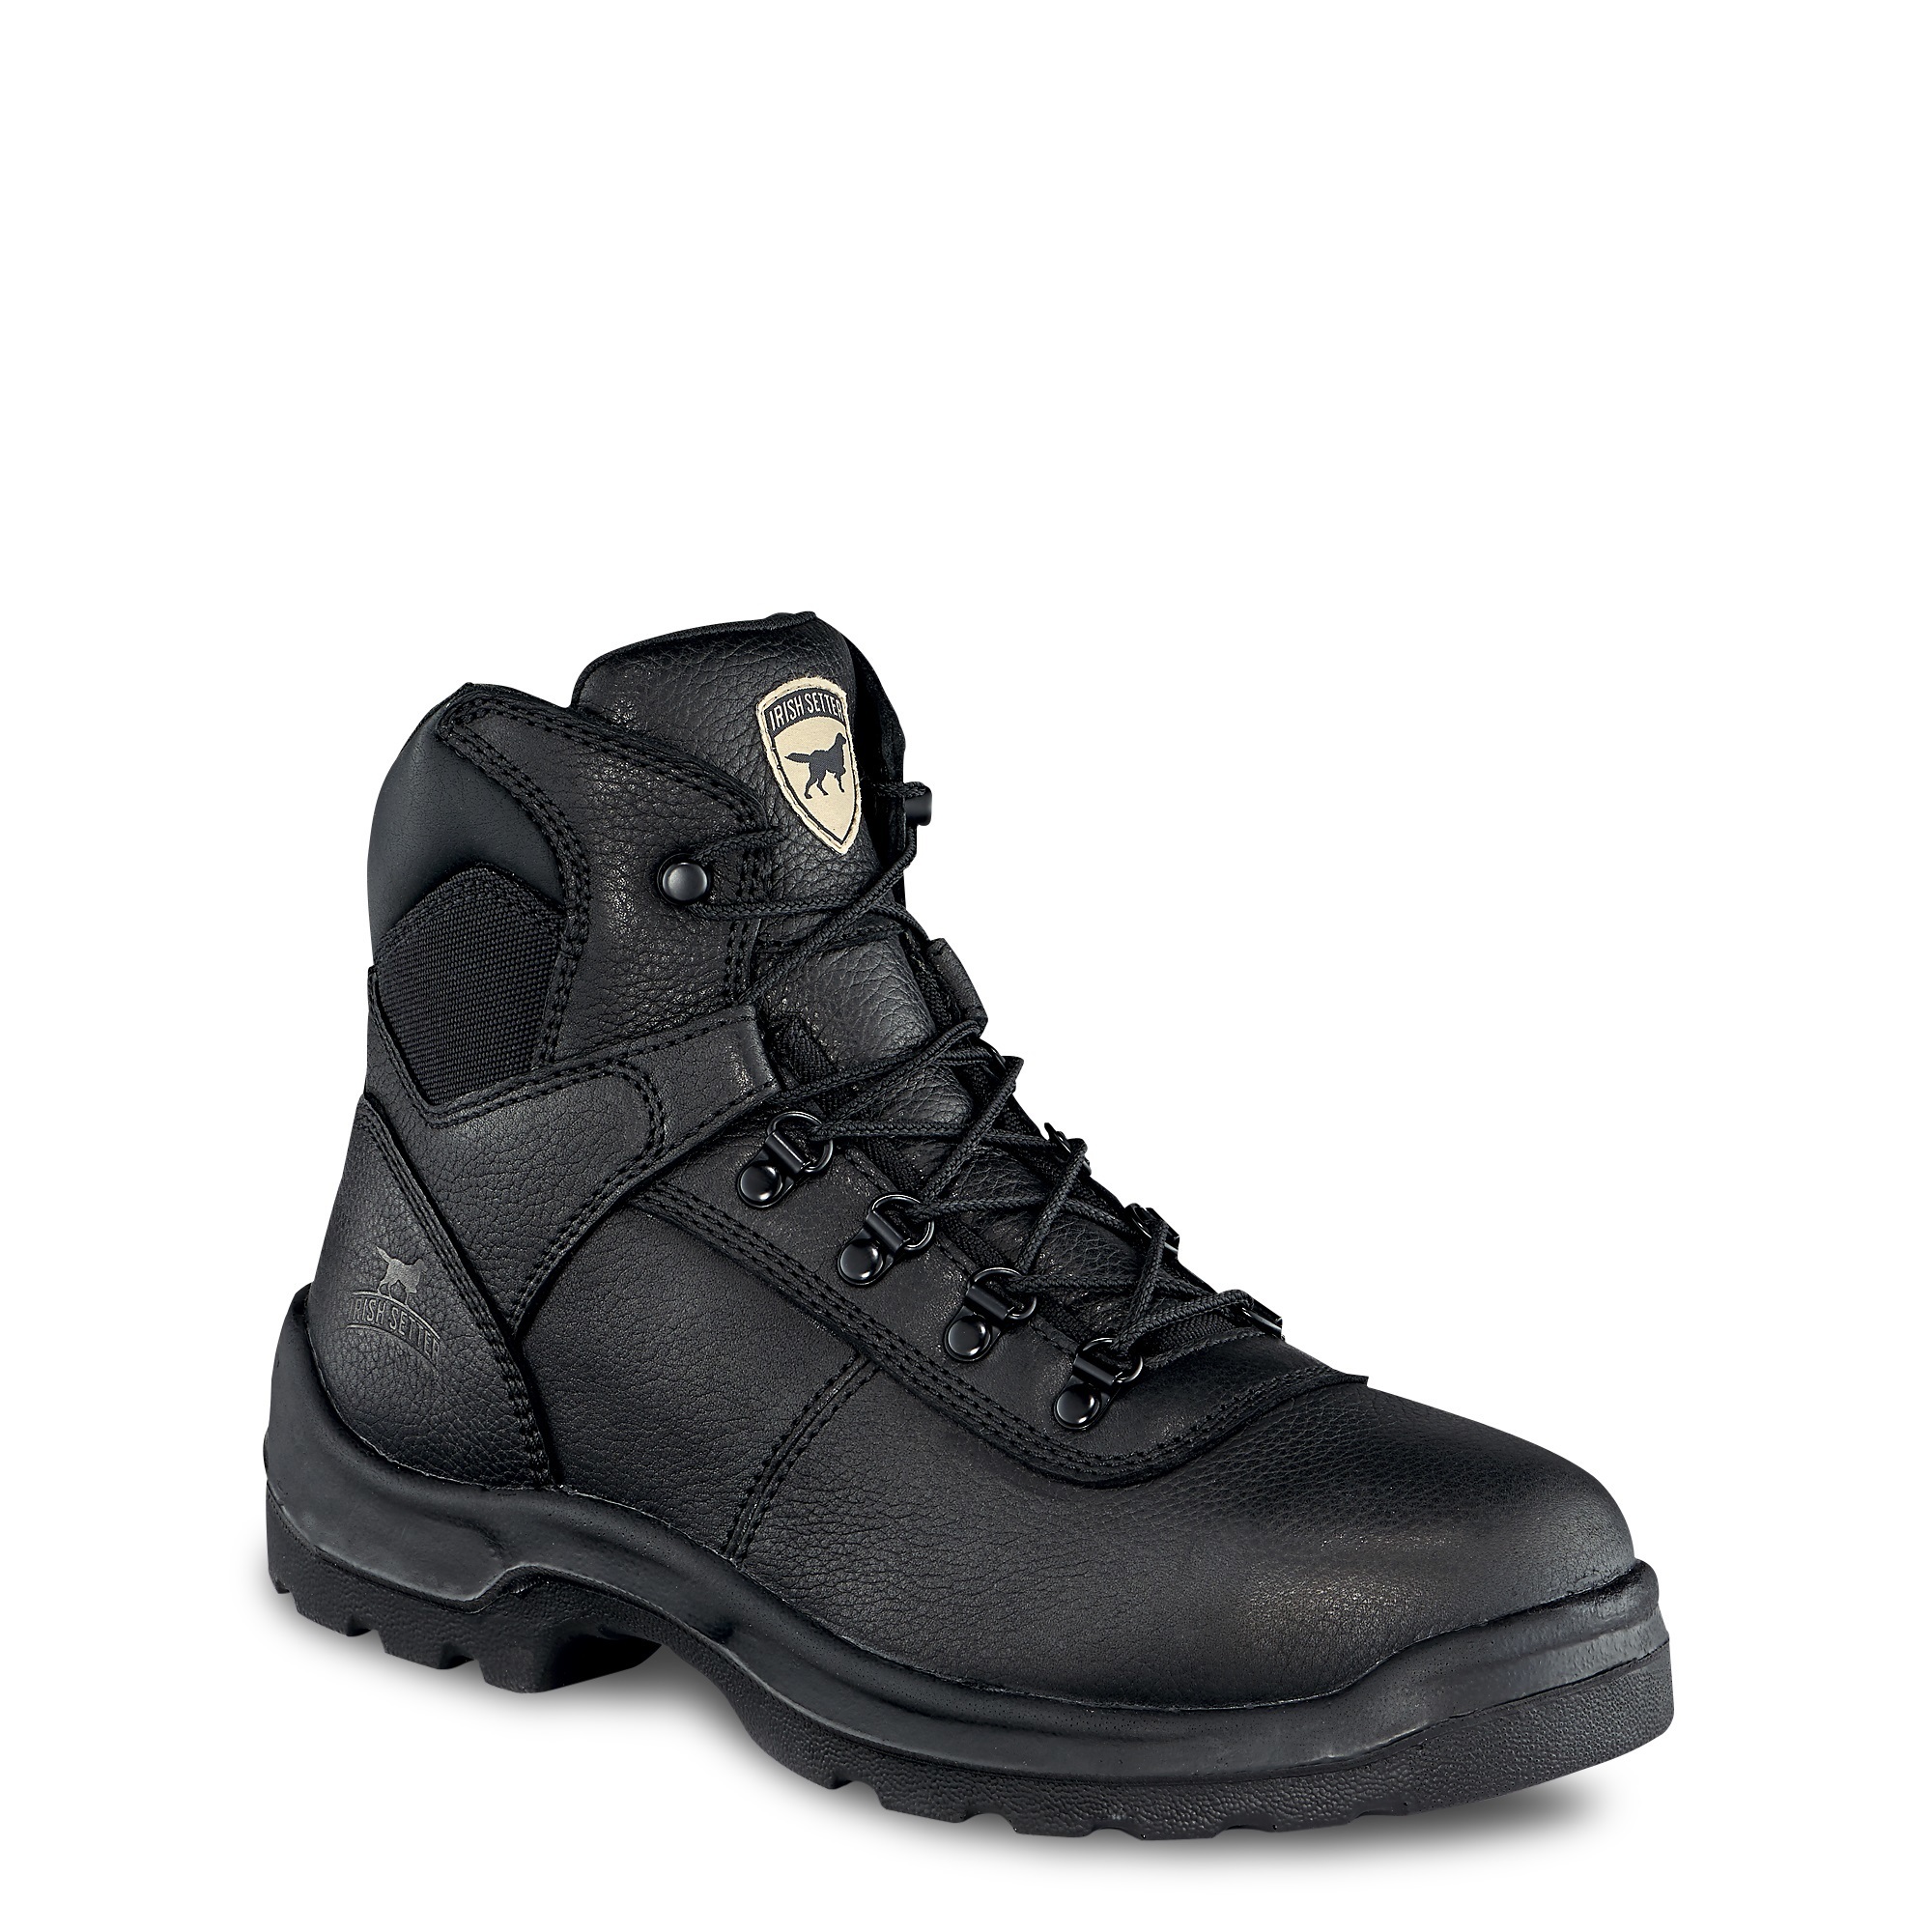 Irish Setter, MEN'S 6in. HIKER SAFETY TOE BOOT | Northern Tool